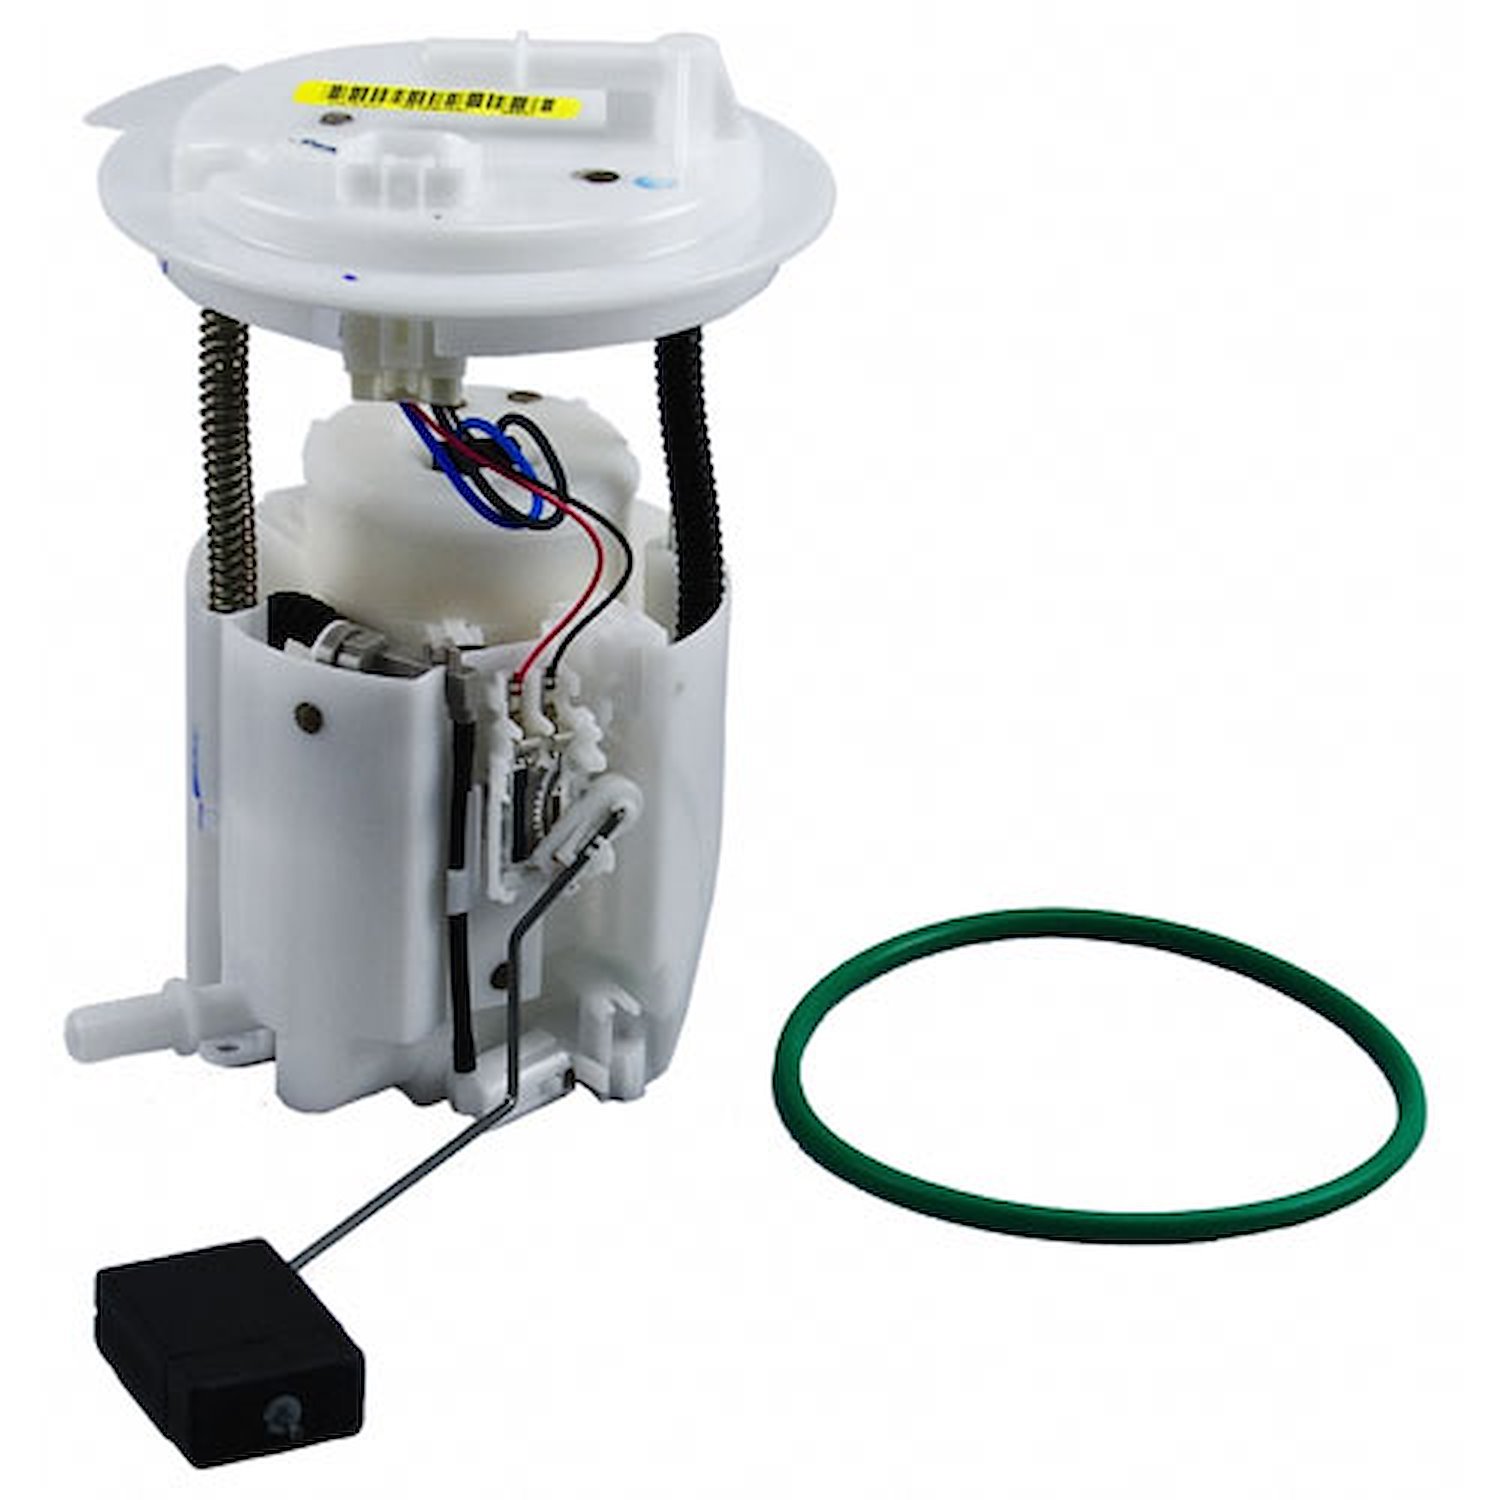 OE Chrysler/Dodge Replacement Electric Fuel Pump Module Assembly 2007-08 Dodge Caliber 2.4L 4 Cyl